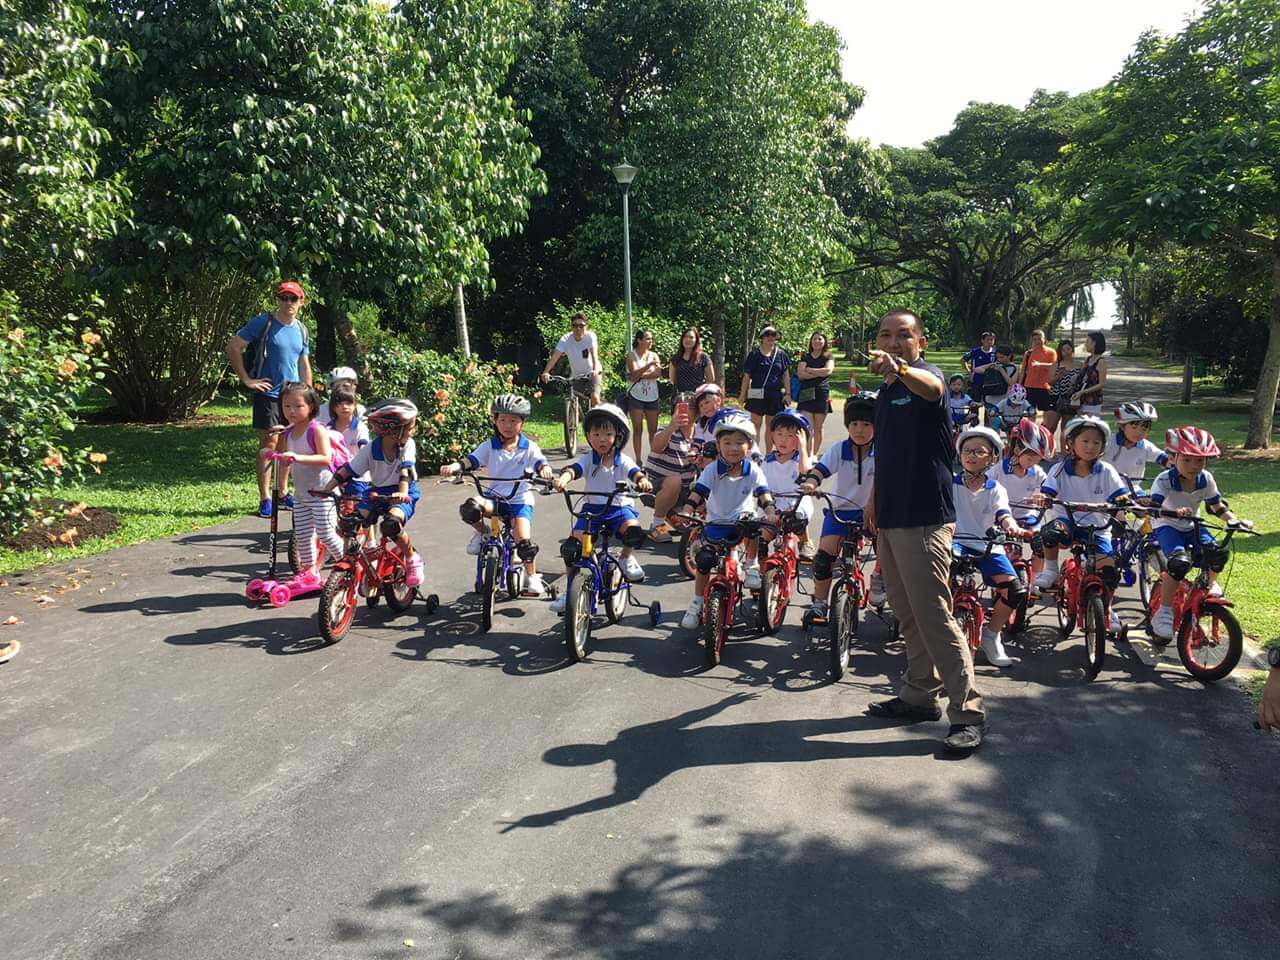 A group of young children riding a bike with guidance from adult trainers